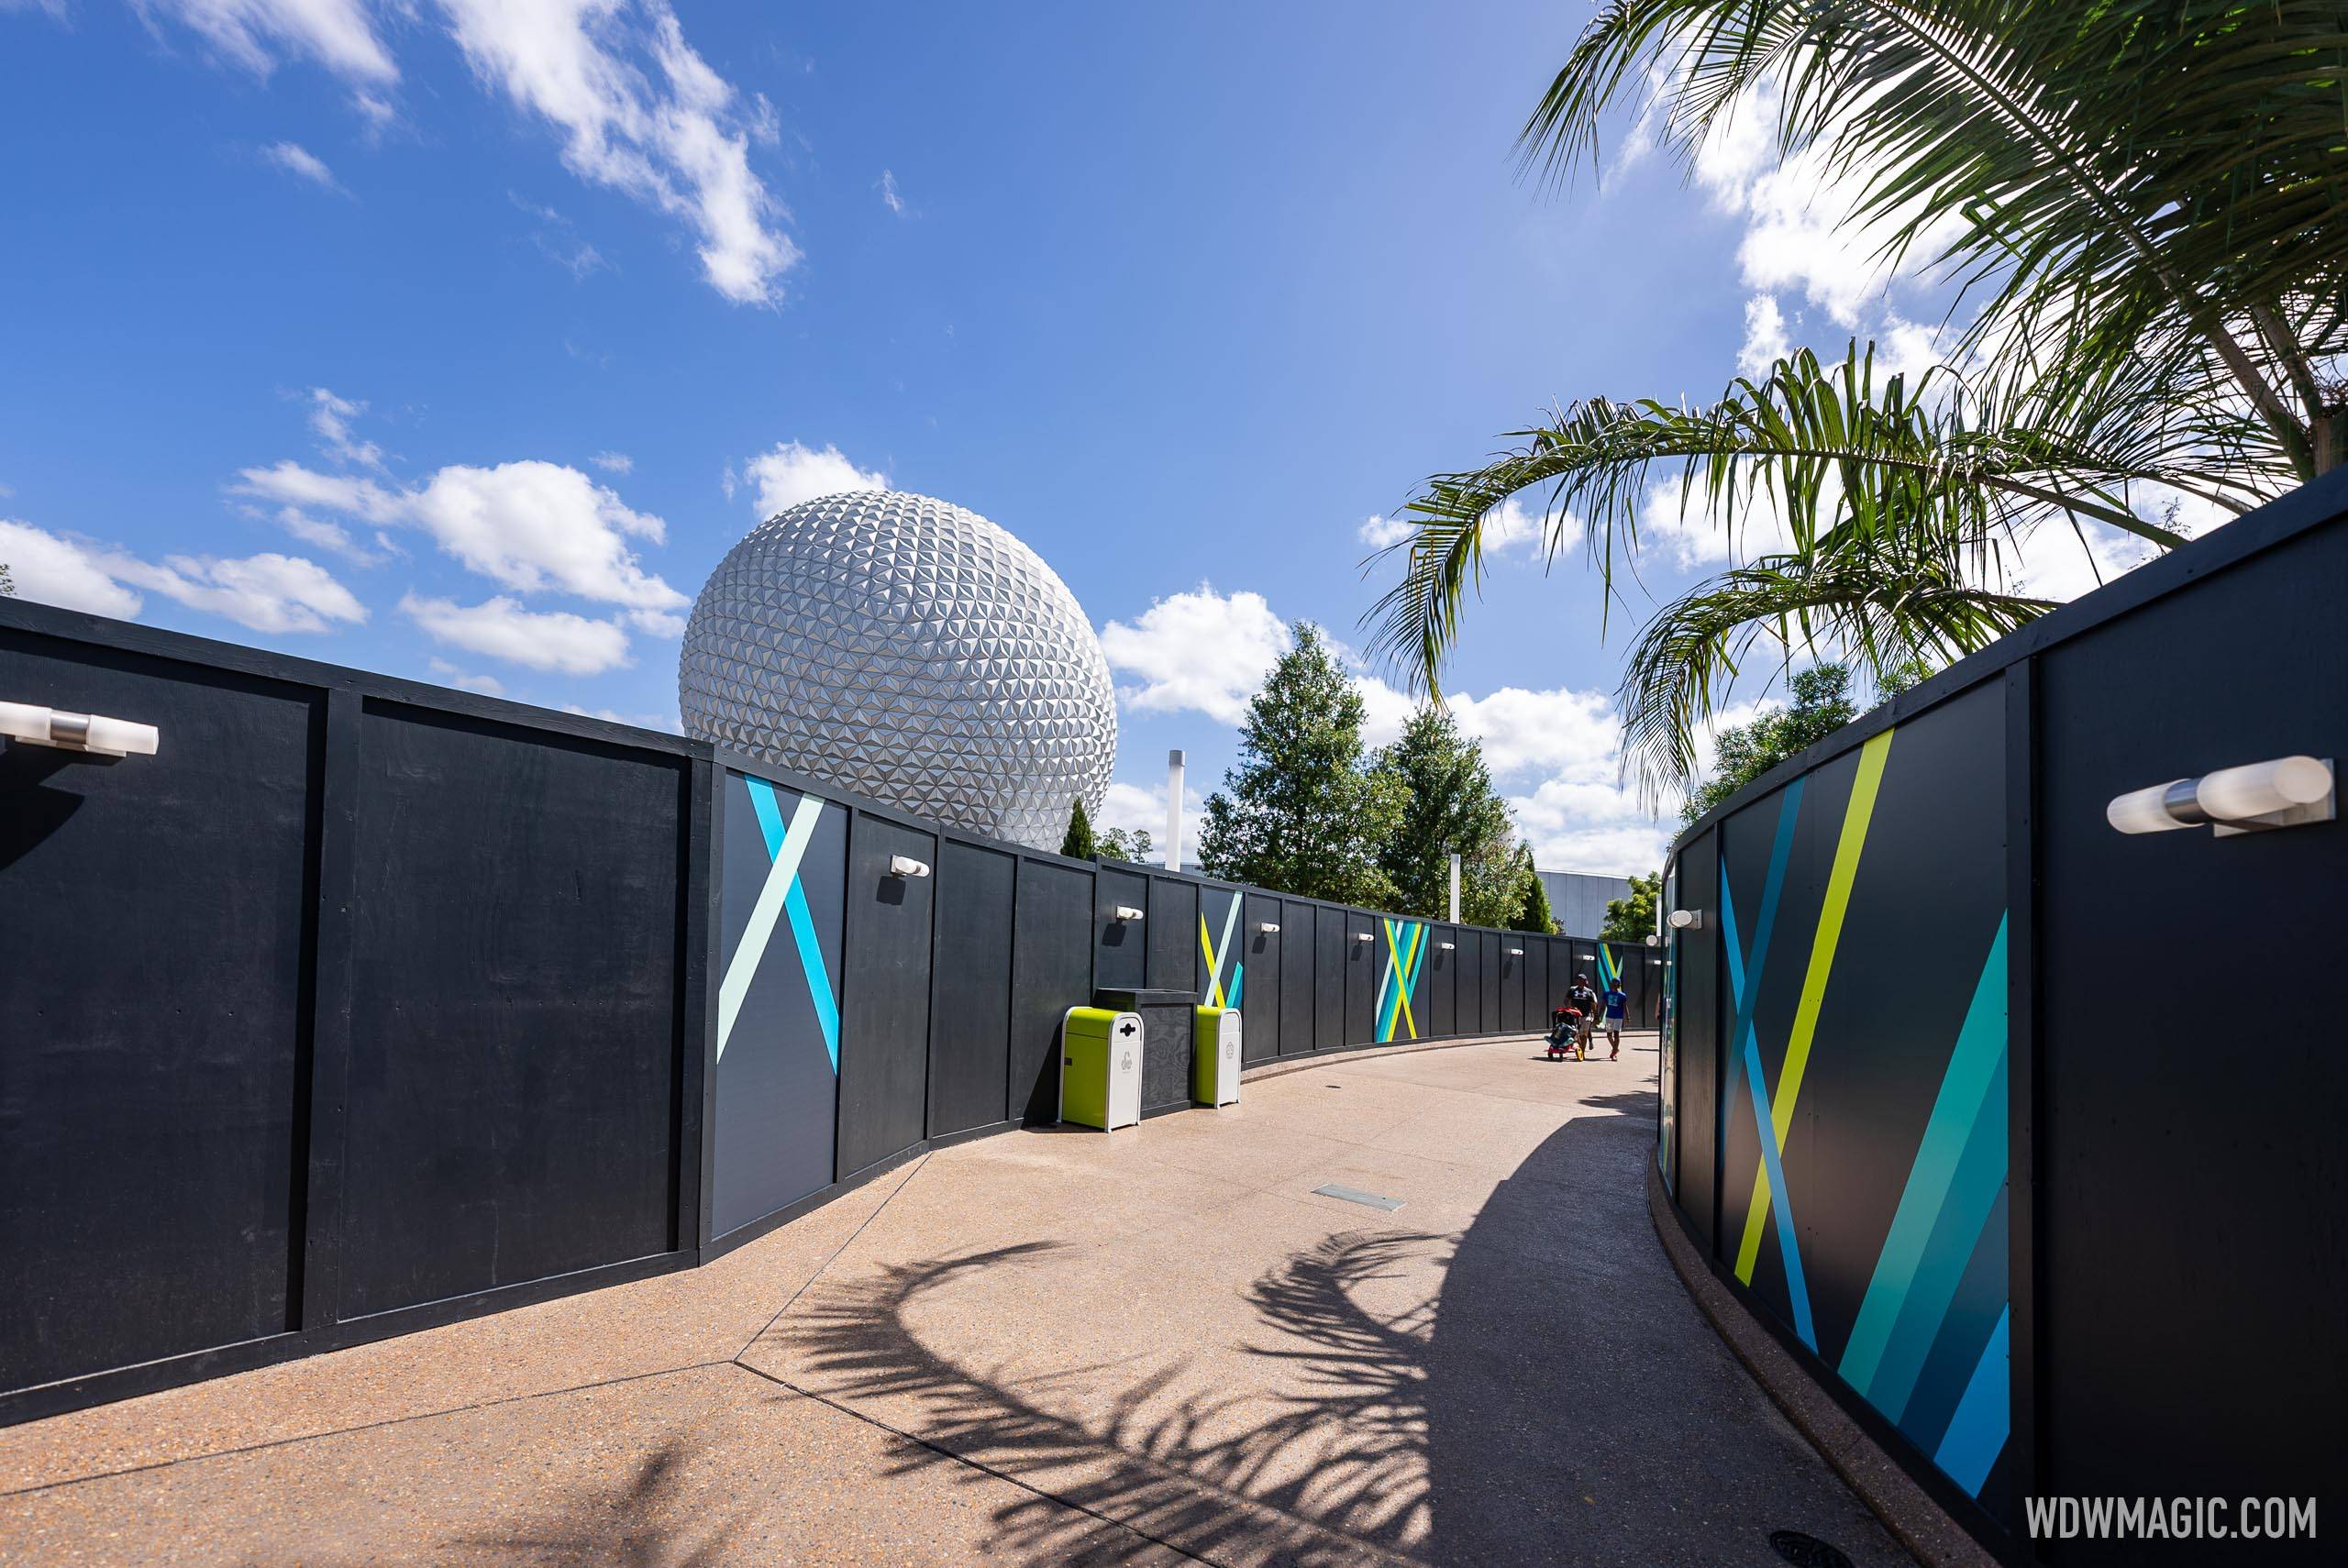 New walkway opens between World Celebration and World Nature in EPCOT